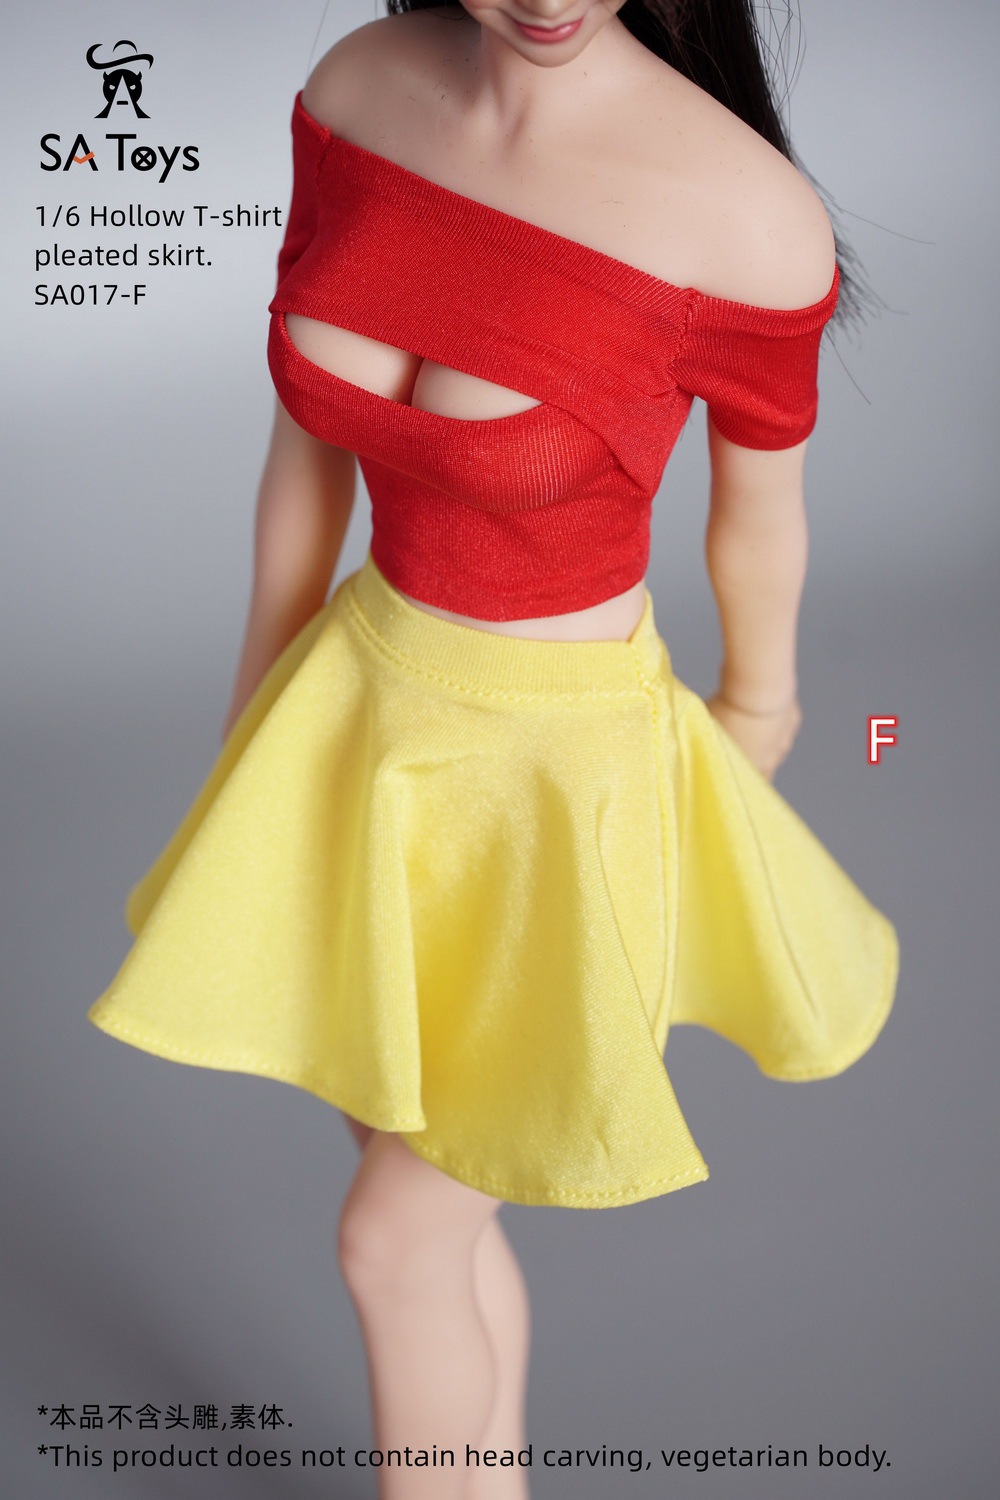 sidezipperskirt - NEW PRODUCT: SA Toys: 1/6 Personalized Poster Style Tight Dress/ Hollow T-shirt Pleated Skirt/Side Zipper Tight Skirt [Various styles available]  16560610